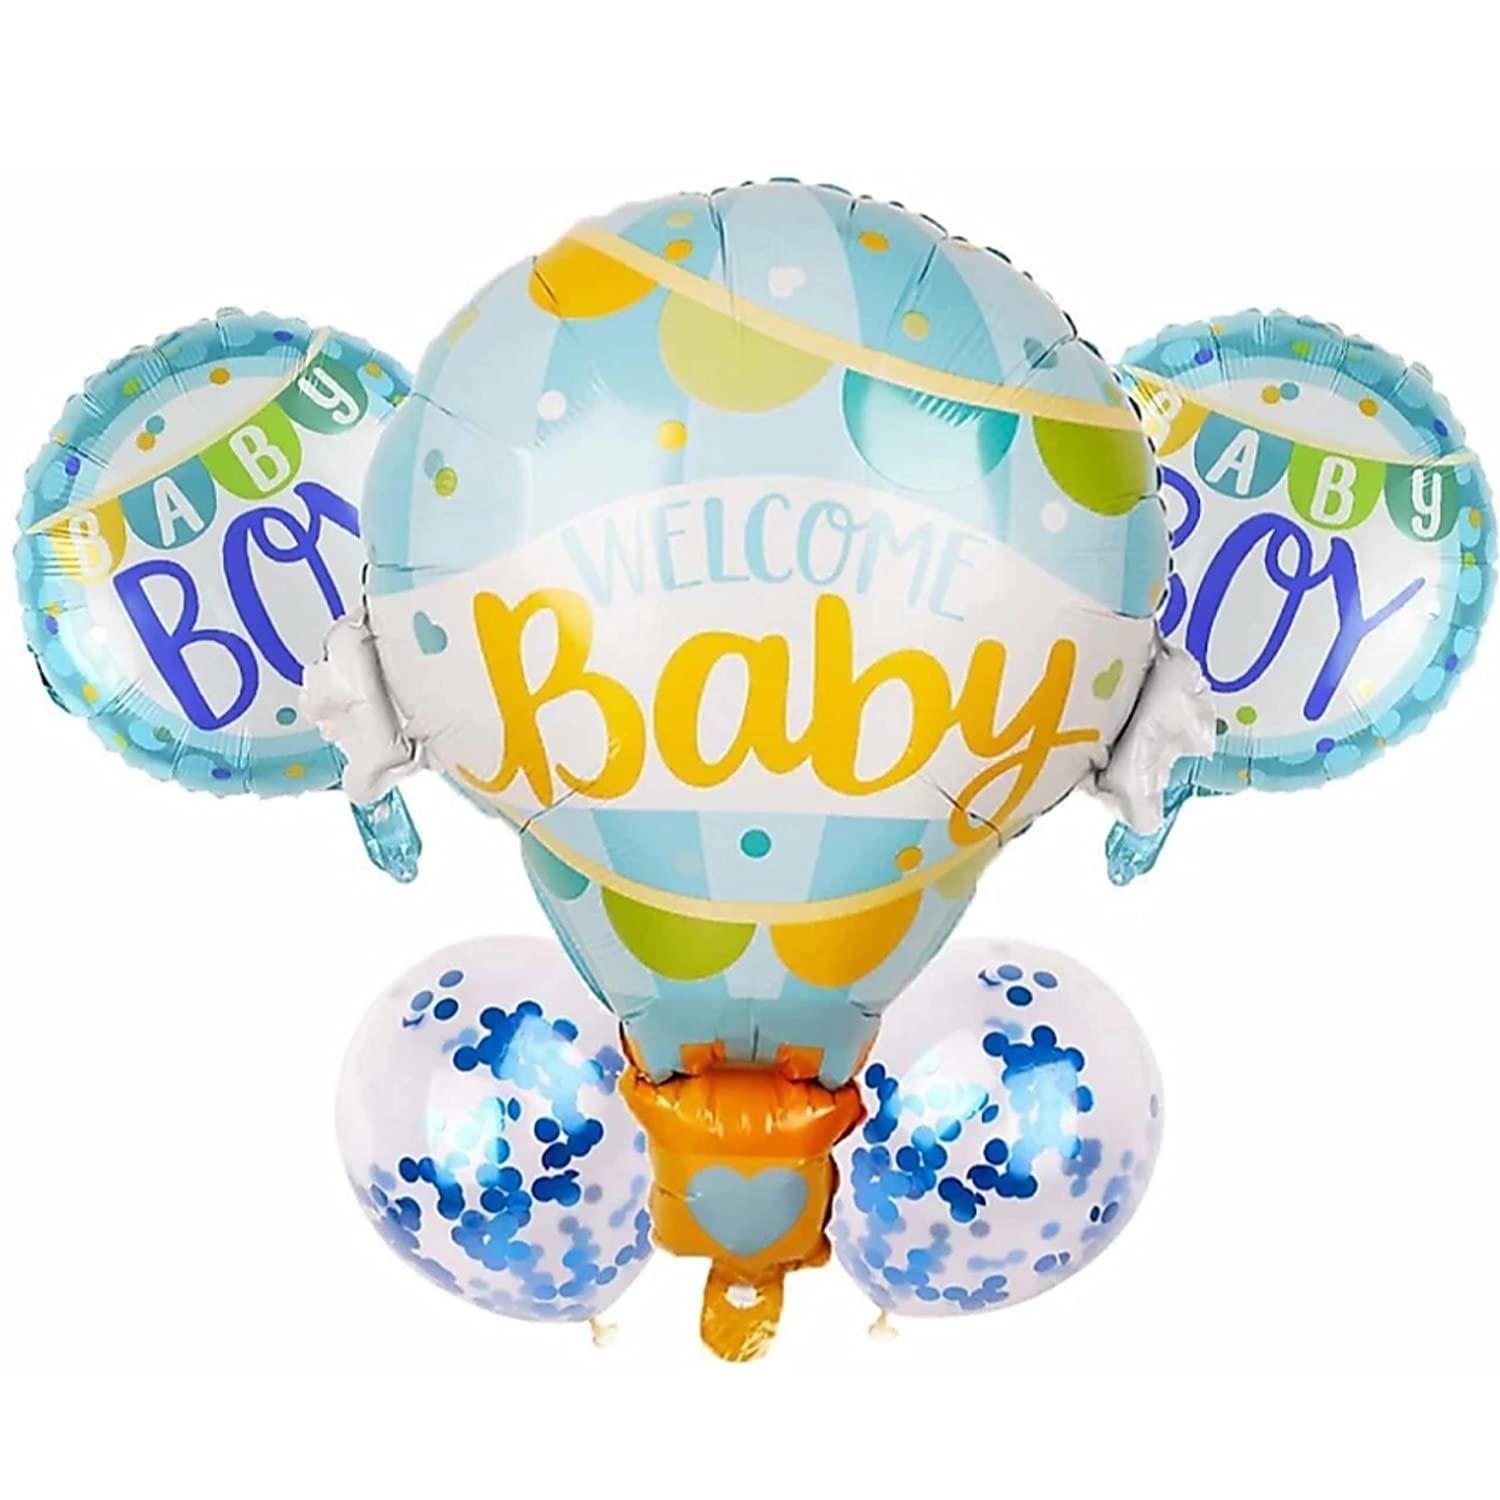 Welcome baby - 5 Balloon Bouquet